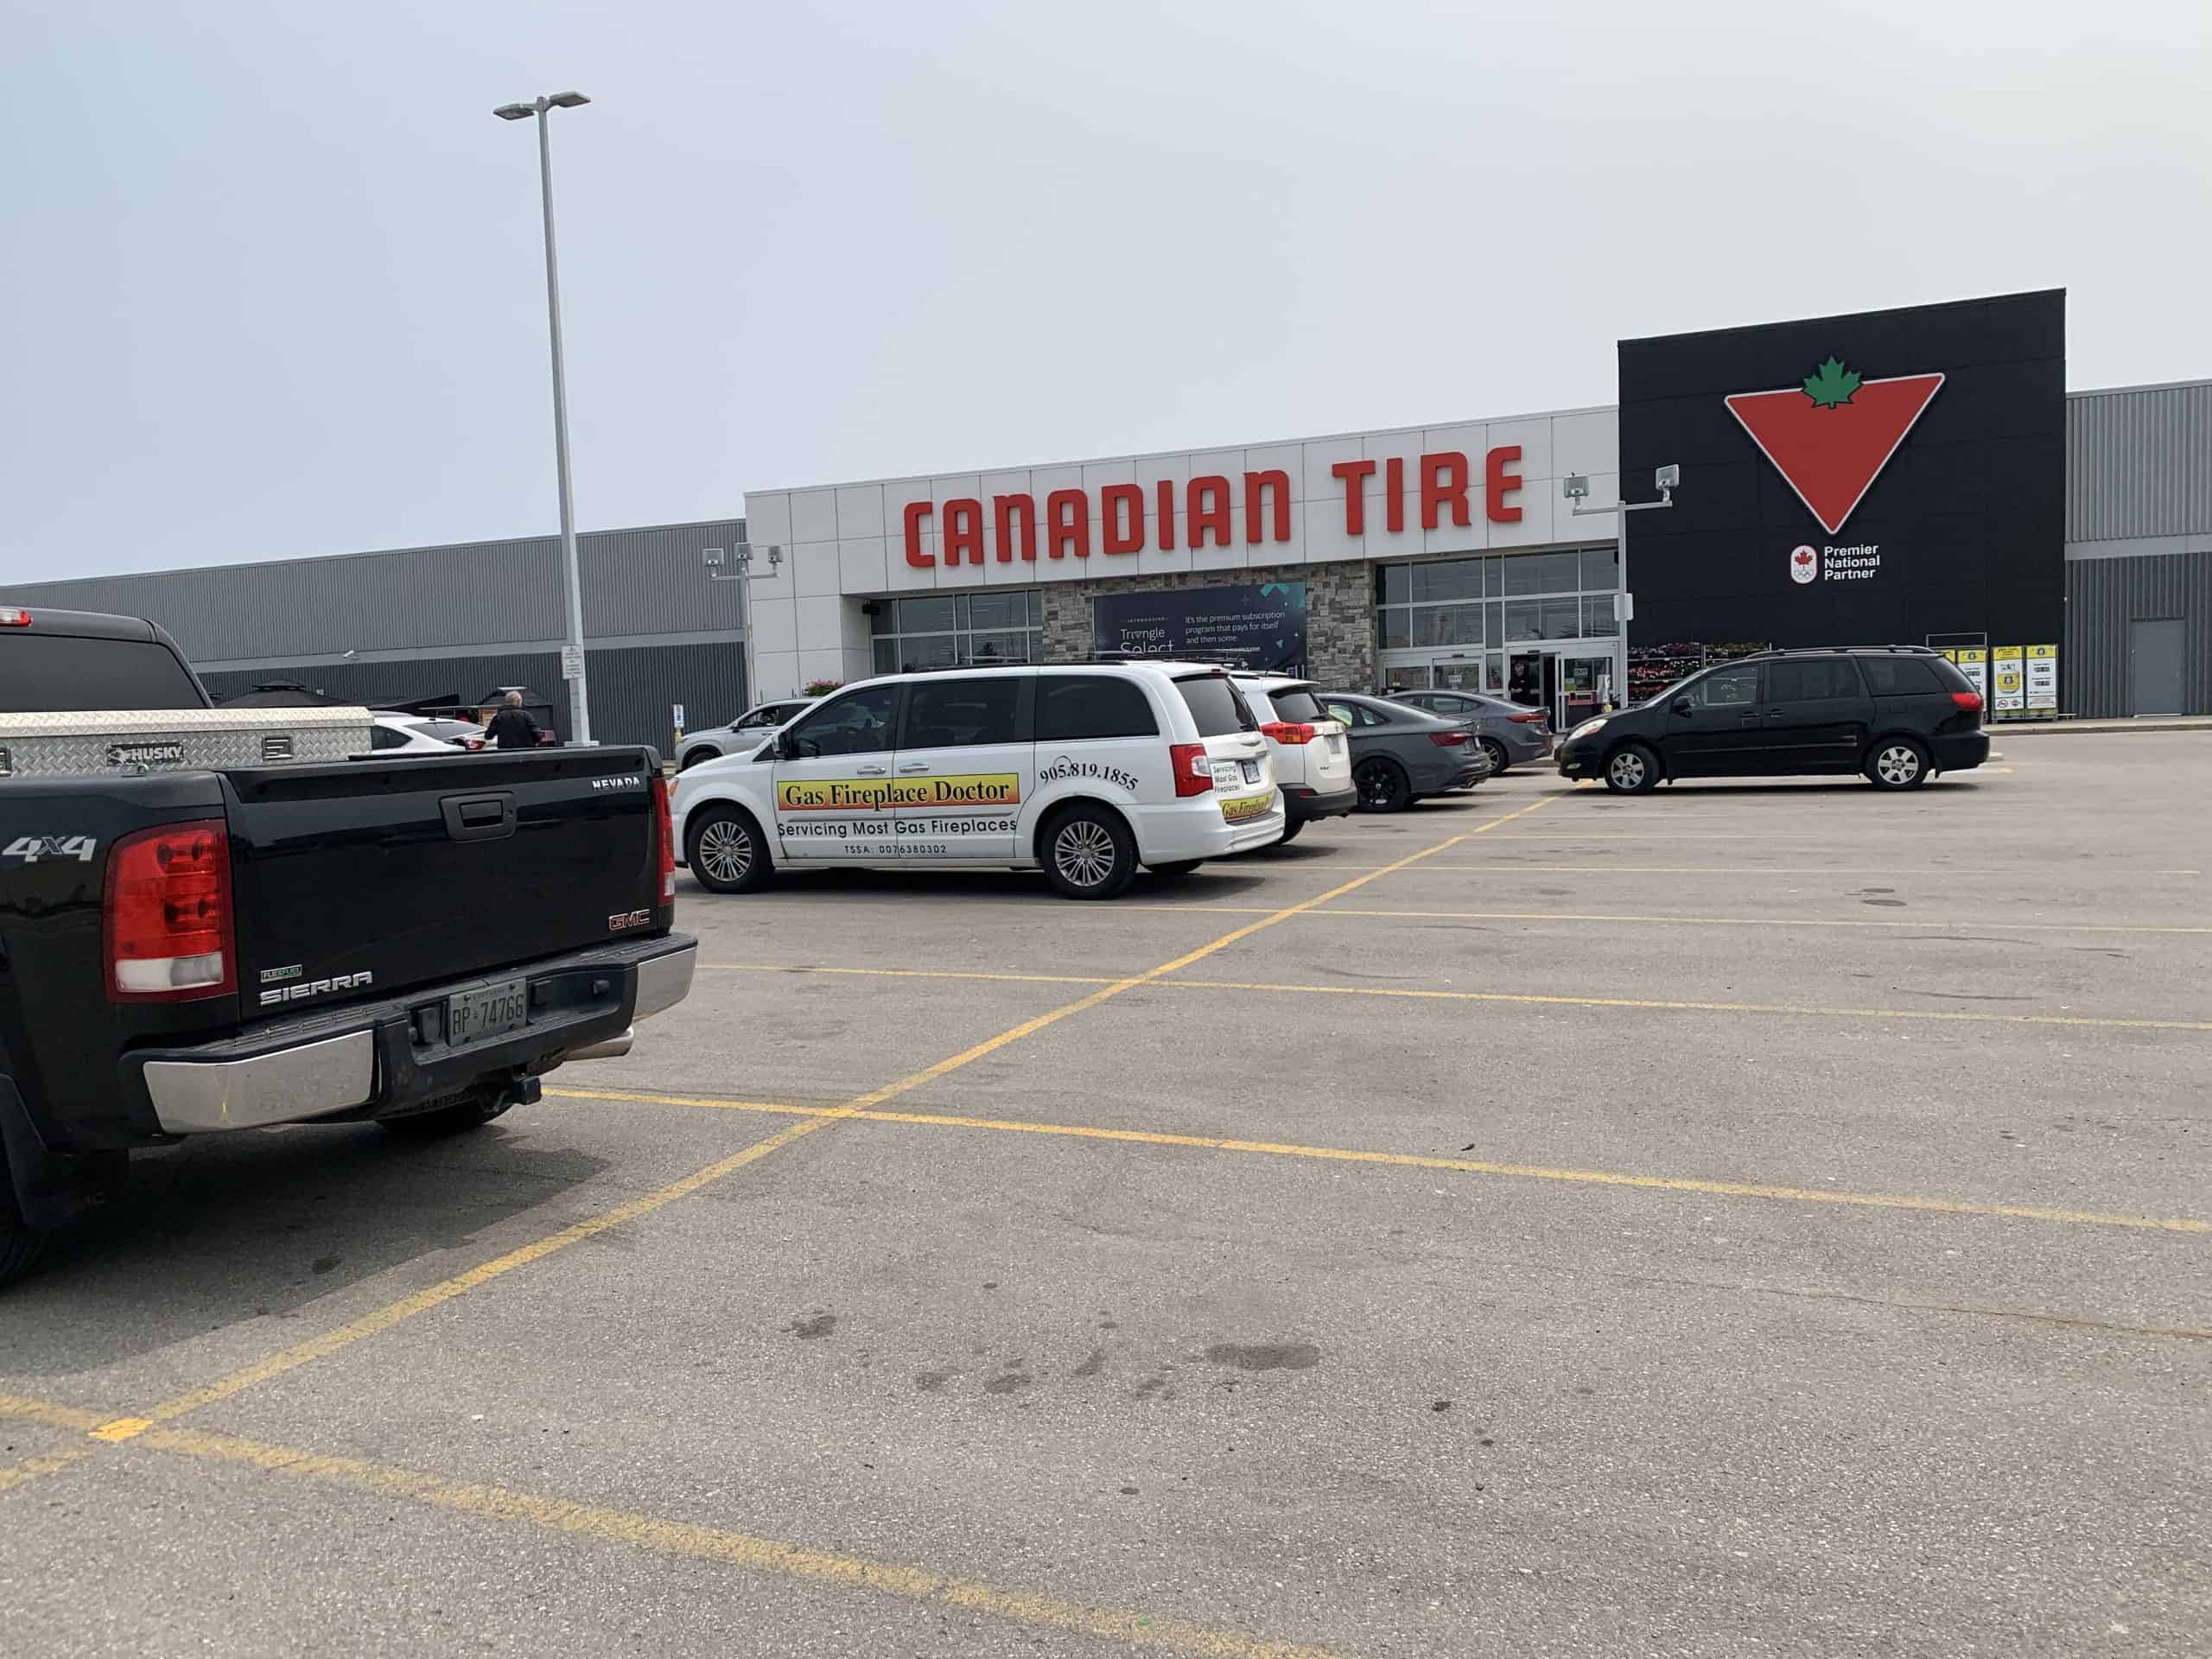 Canadian Tire says they 'don't condone' anti-Trudeau protests like